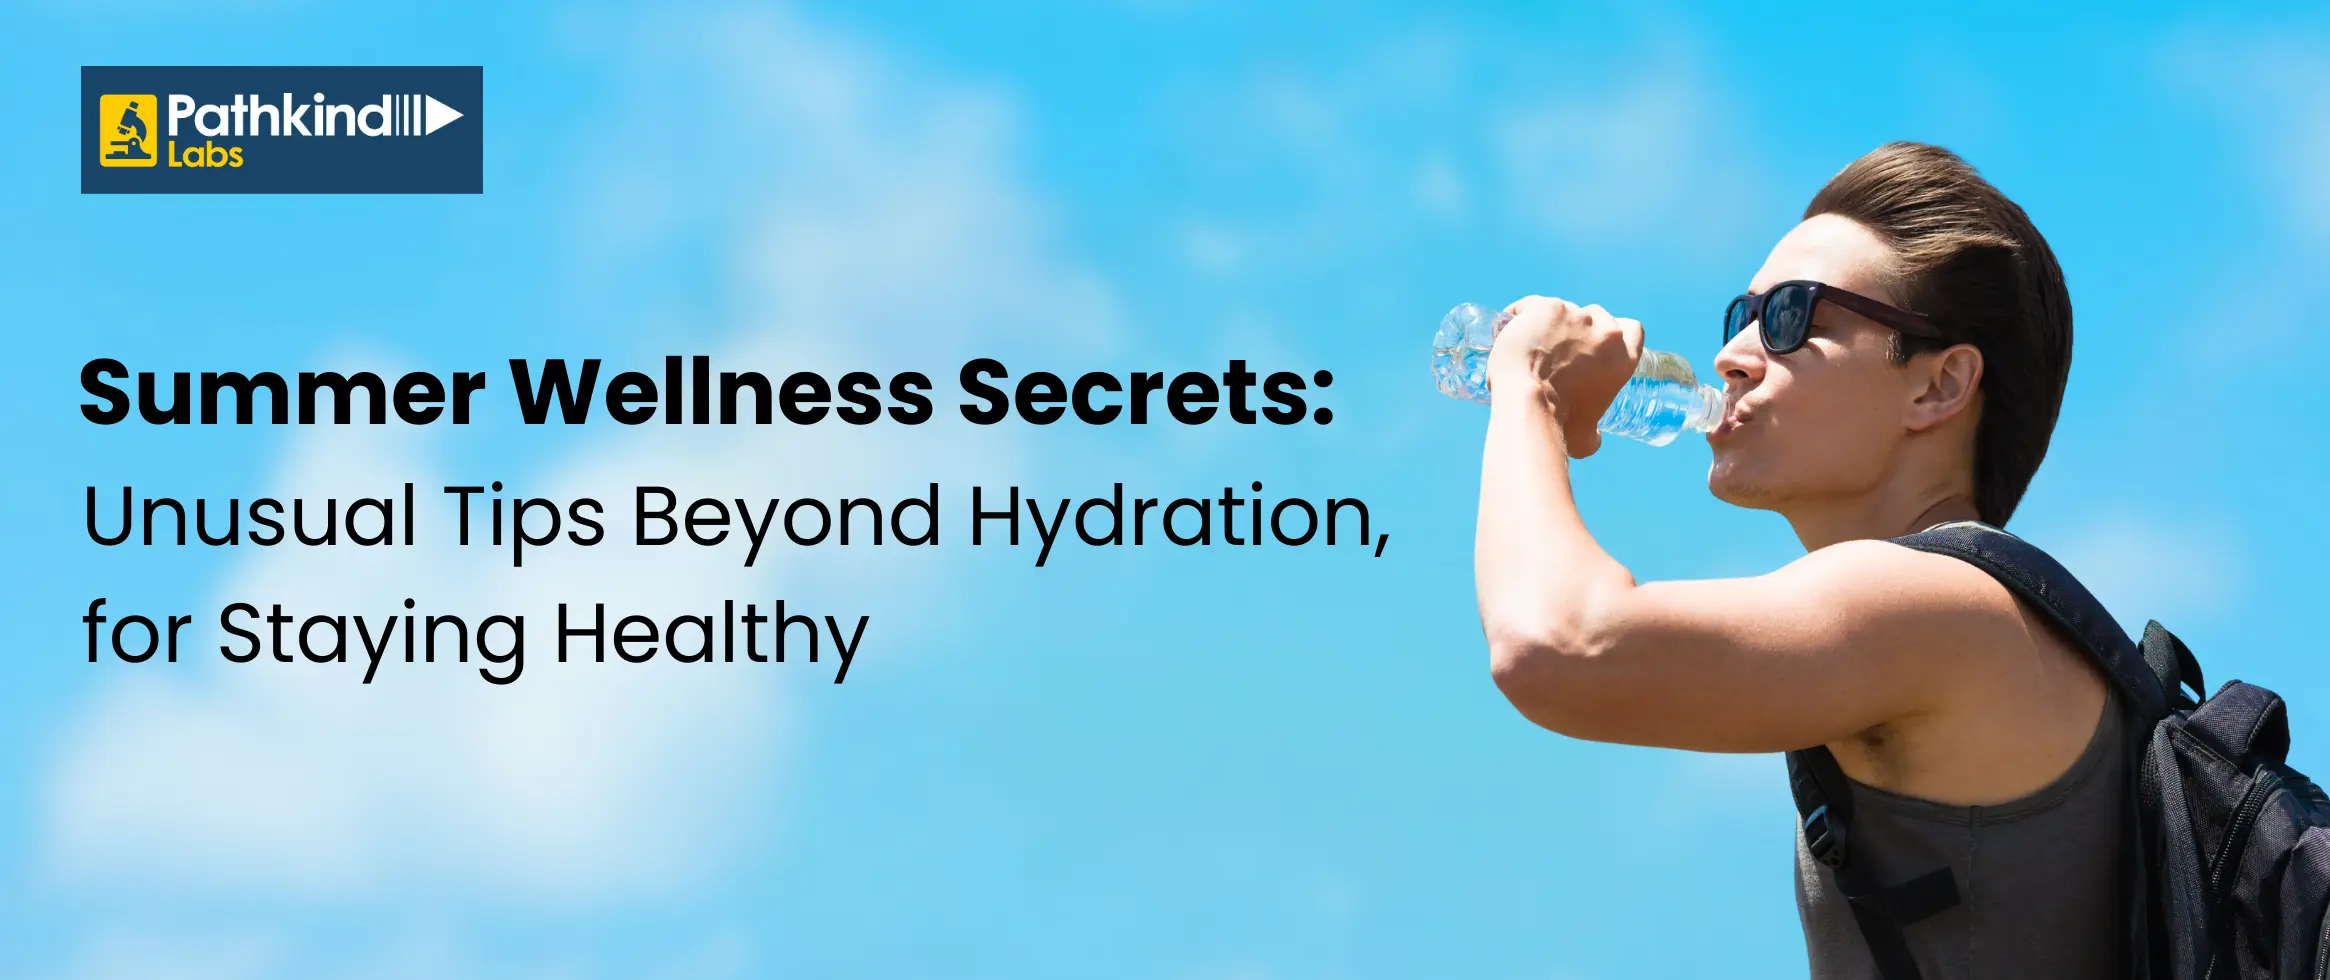  Summer Wellness Secrets: Unusual Tips Beyond Hydration for Staying Hea...